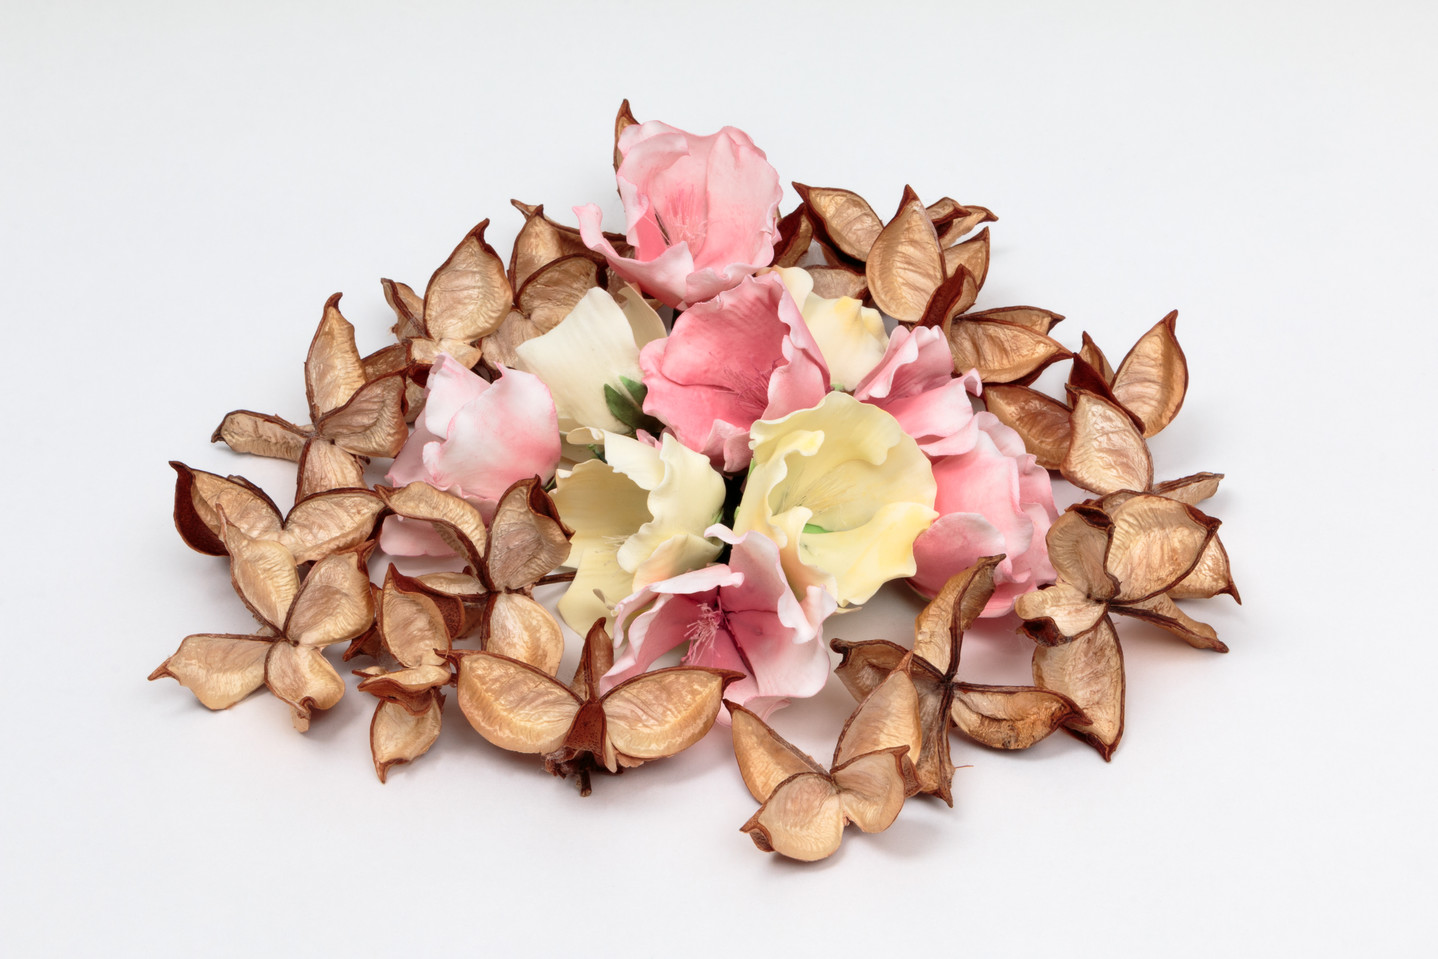 A ring of opened, delicate, pale brown cotton pods surrounding a small pile of creamy white and pastel pink flowers made of sugar.